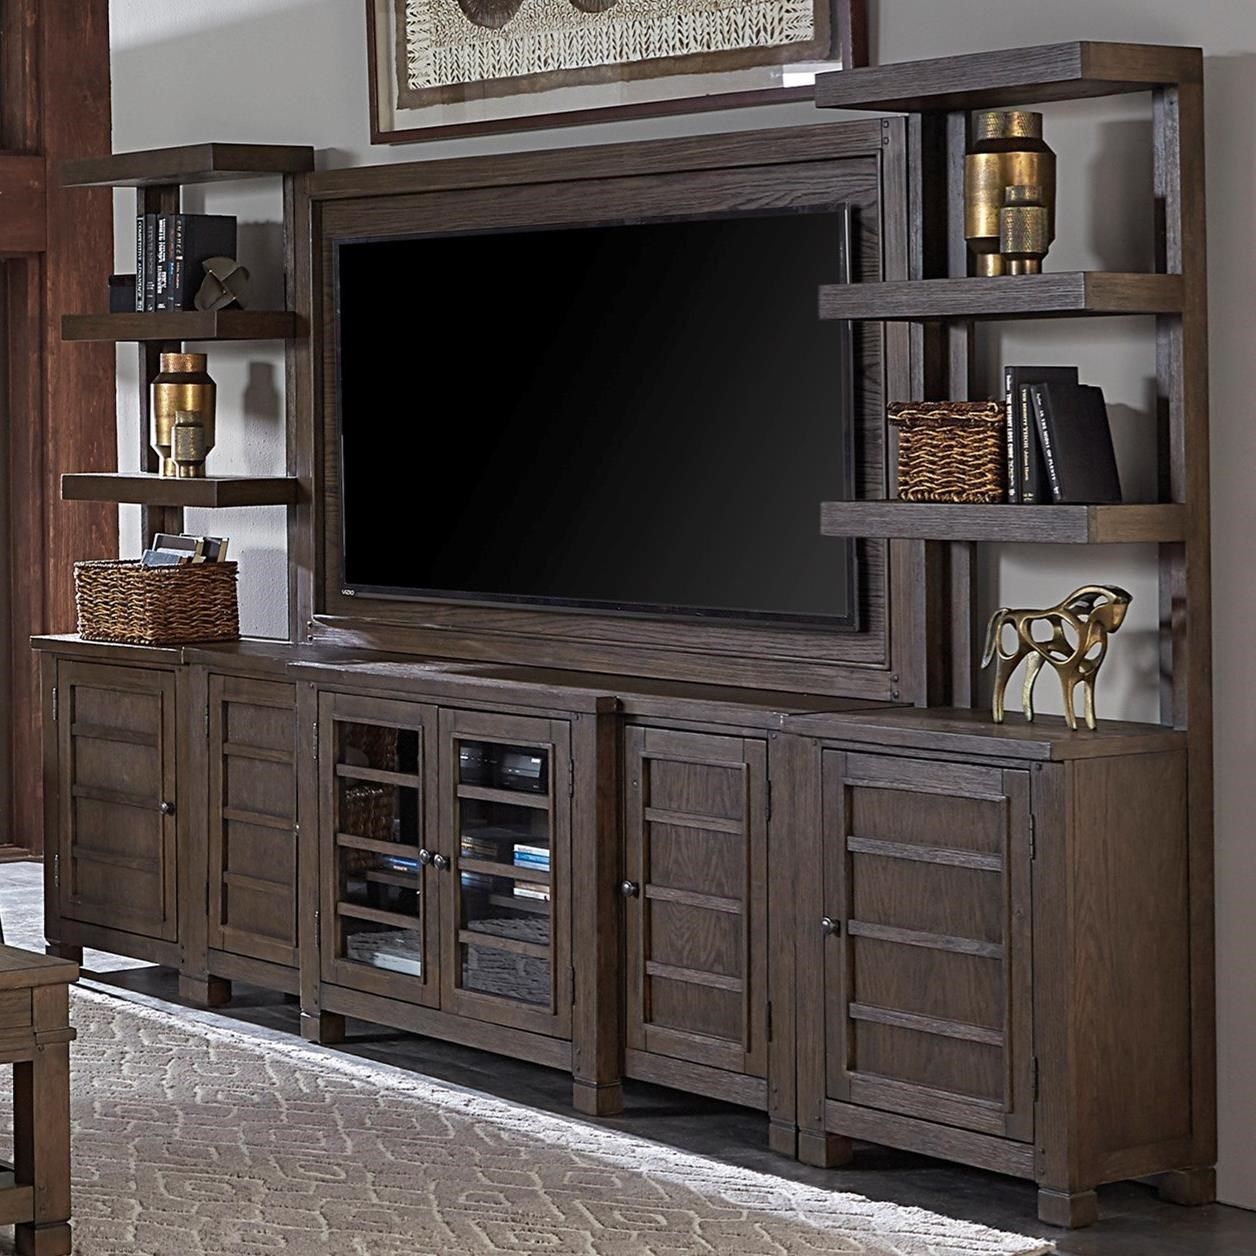 Aspenhome Tucker 75" Console With Tv Backer And Piers | Find Your With Regard To Entertainment Units With Bridge (Gallery 9 of 20)